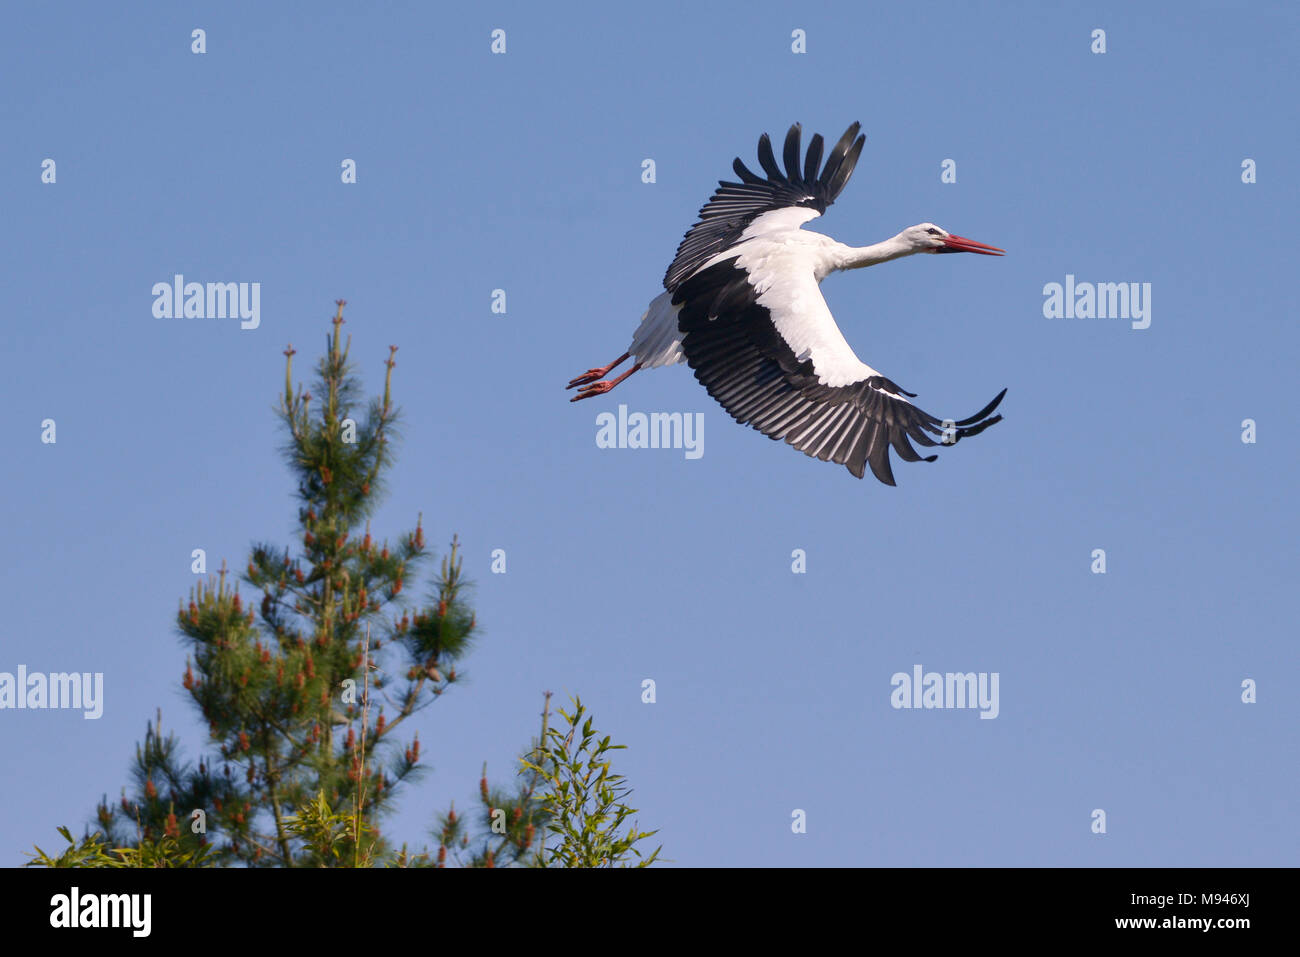 White stork (Ciconia ciconia) in flight view from above on blue sky background Stock Photo